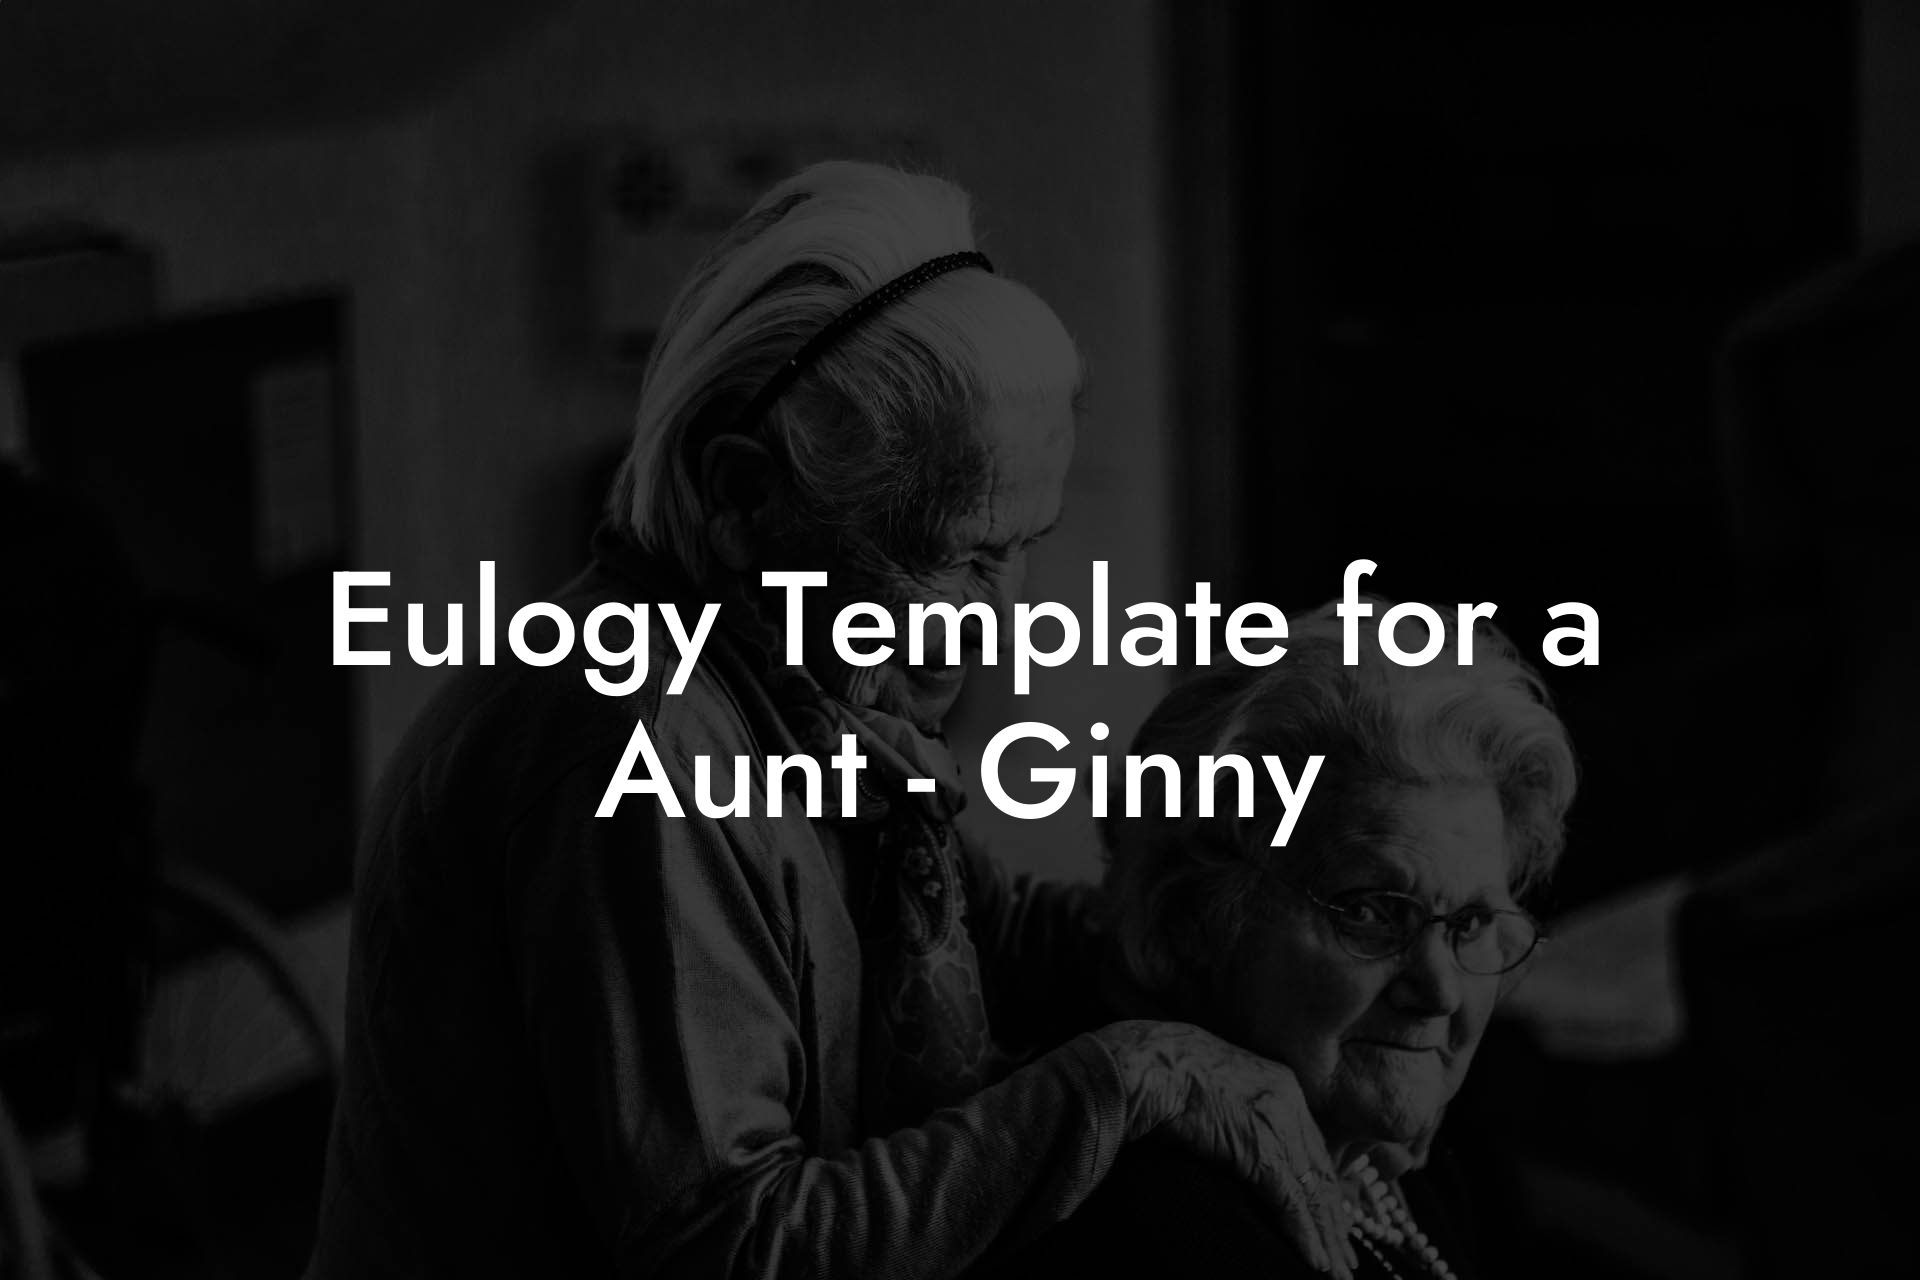 Eulogy Template for a Aunt - Ginny